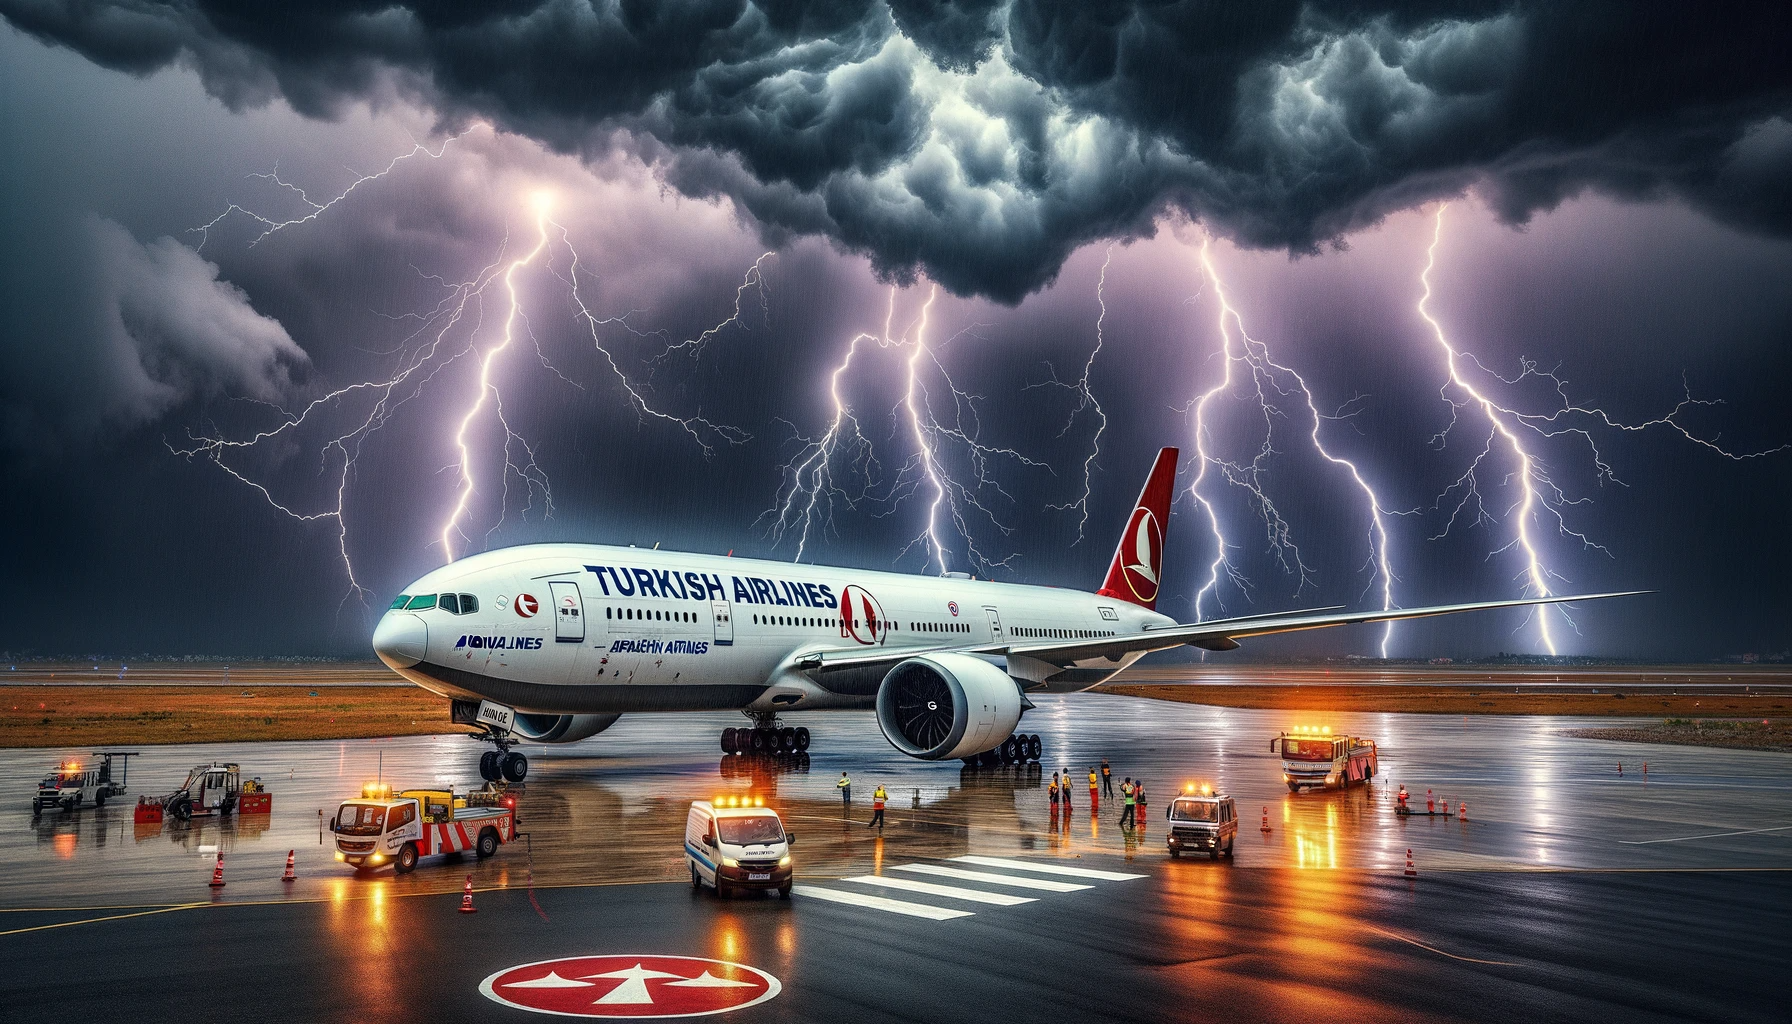 Photo of a Turkish Airlines aircraft on a runway in Nepal under a stormy sky. The aircraft is a Boeing 777 with the Turkish Airlines logo prominently